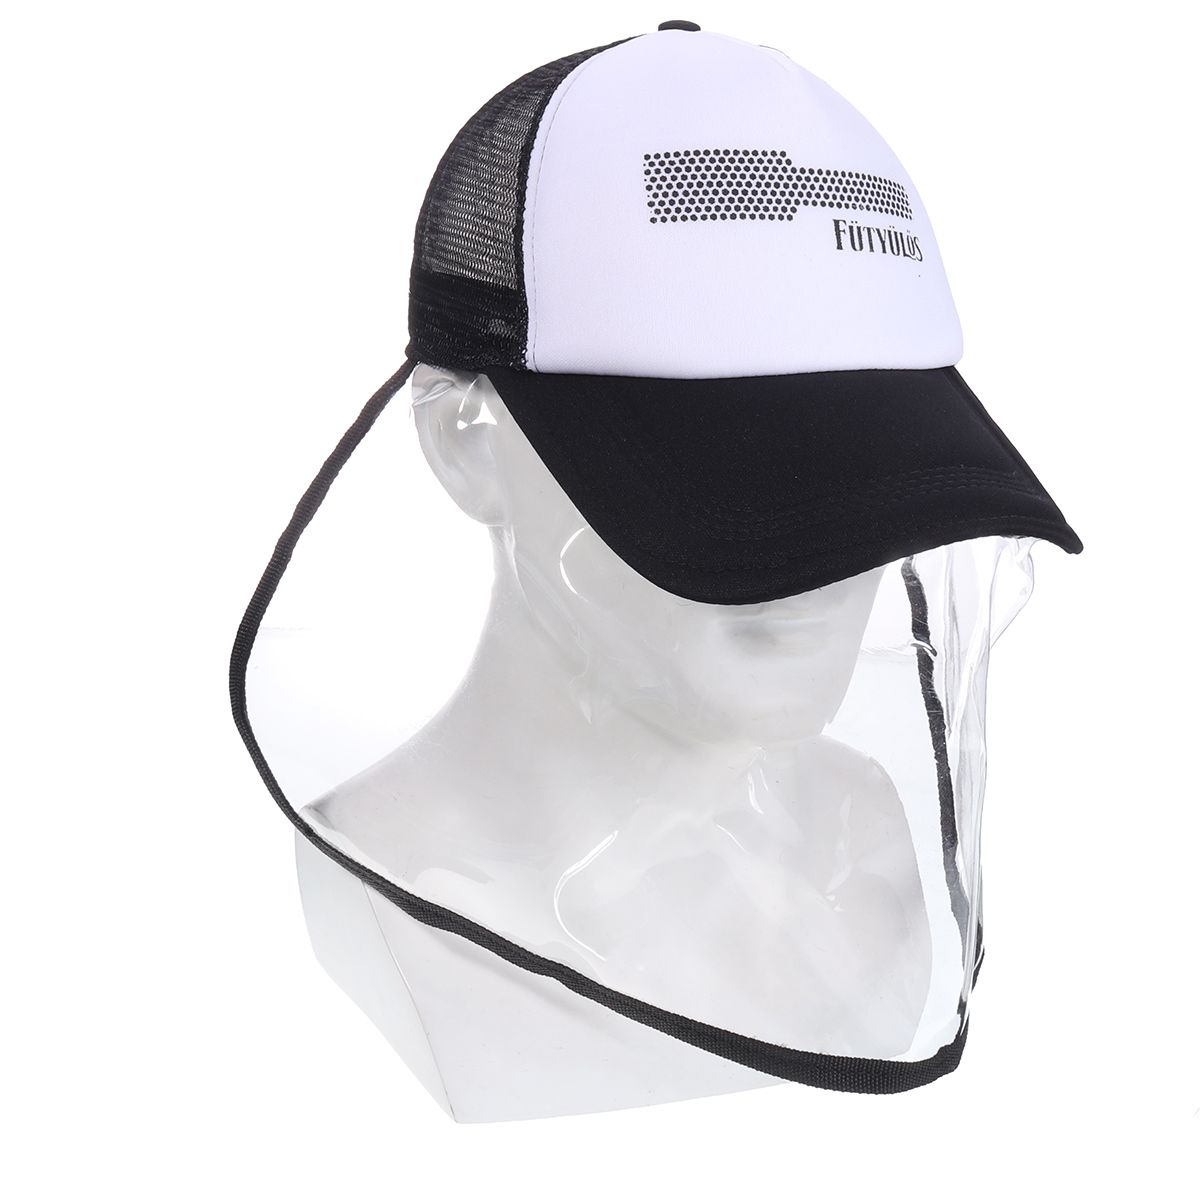 Find Anti spitting Protective Hat Dustproof Cover Peaked Cap Fisherman Sun protection for Sale on Gipsybee.com with cryptocurrencies